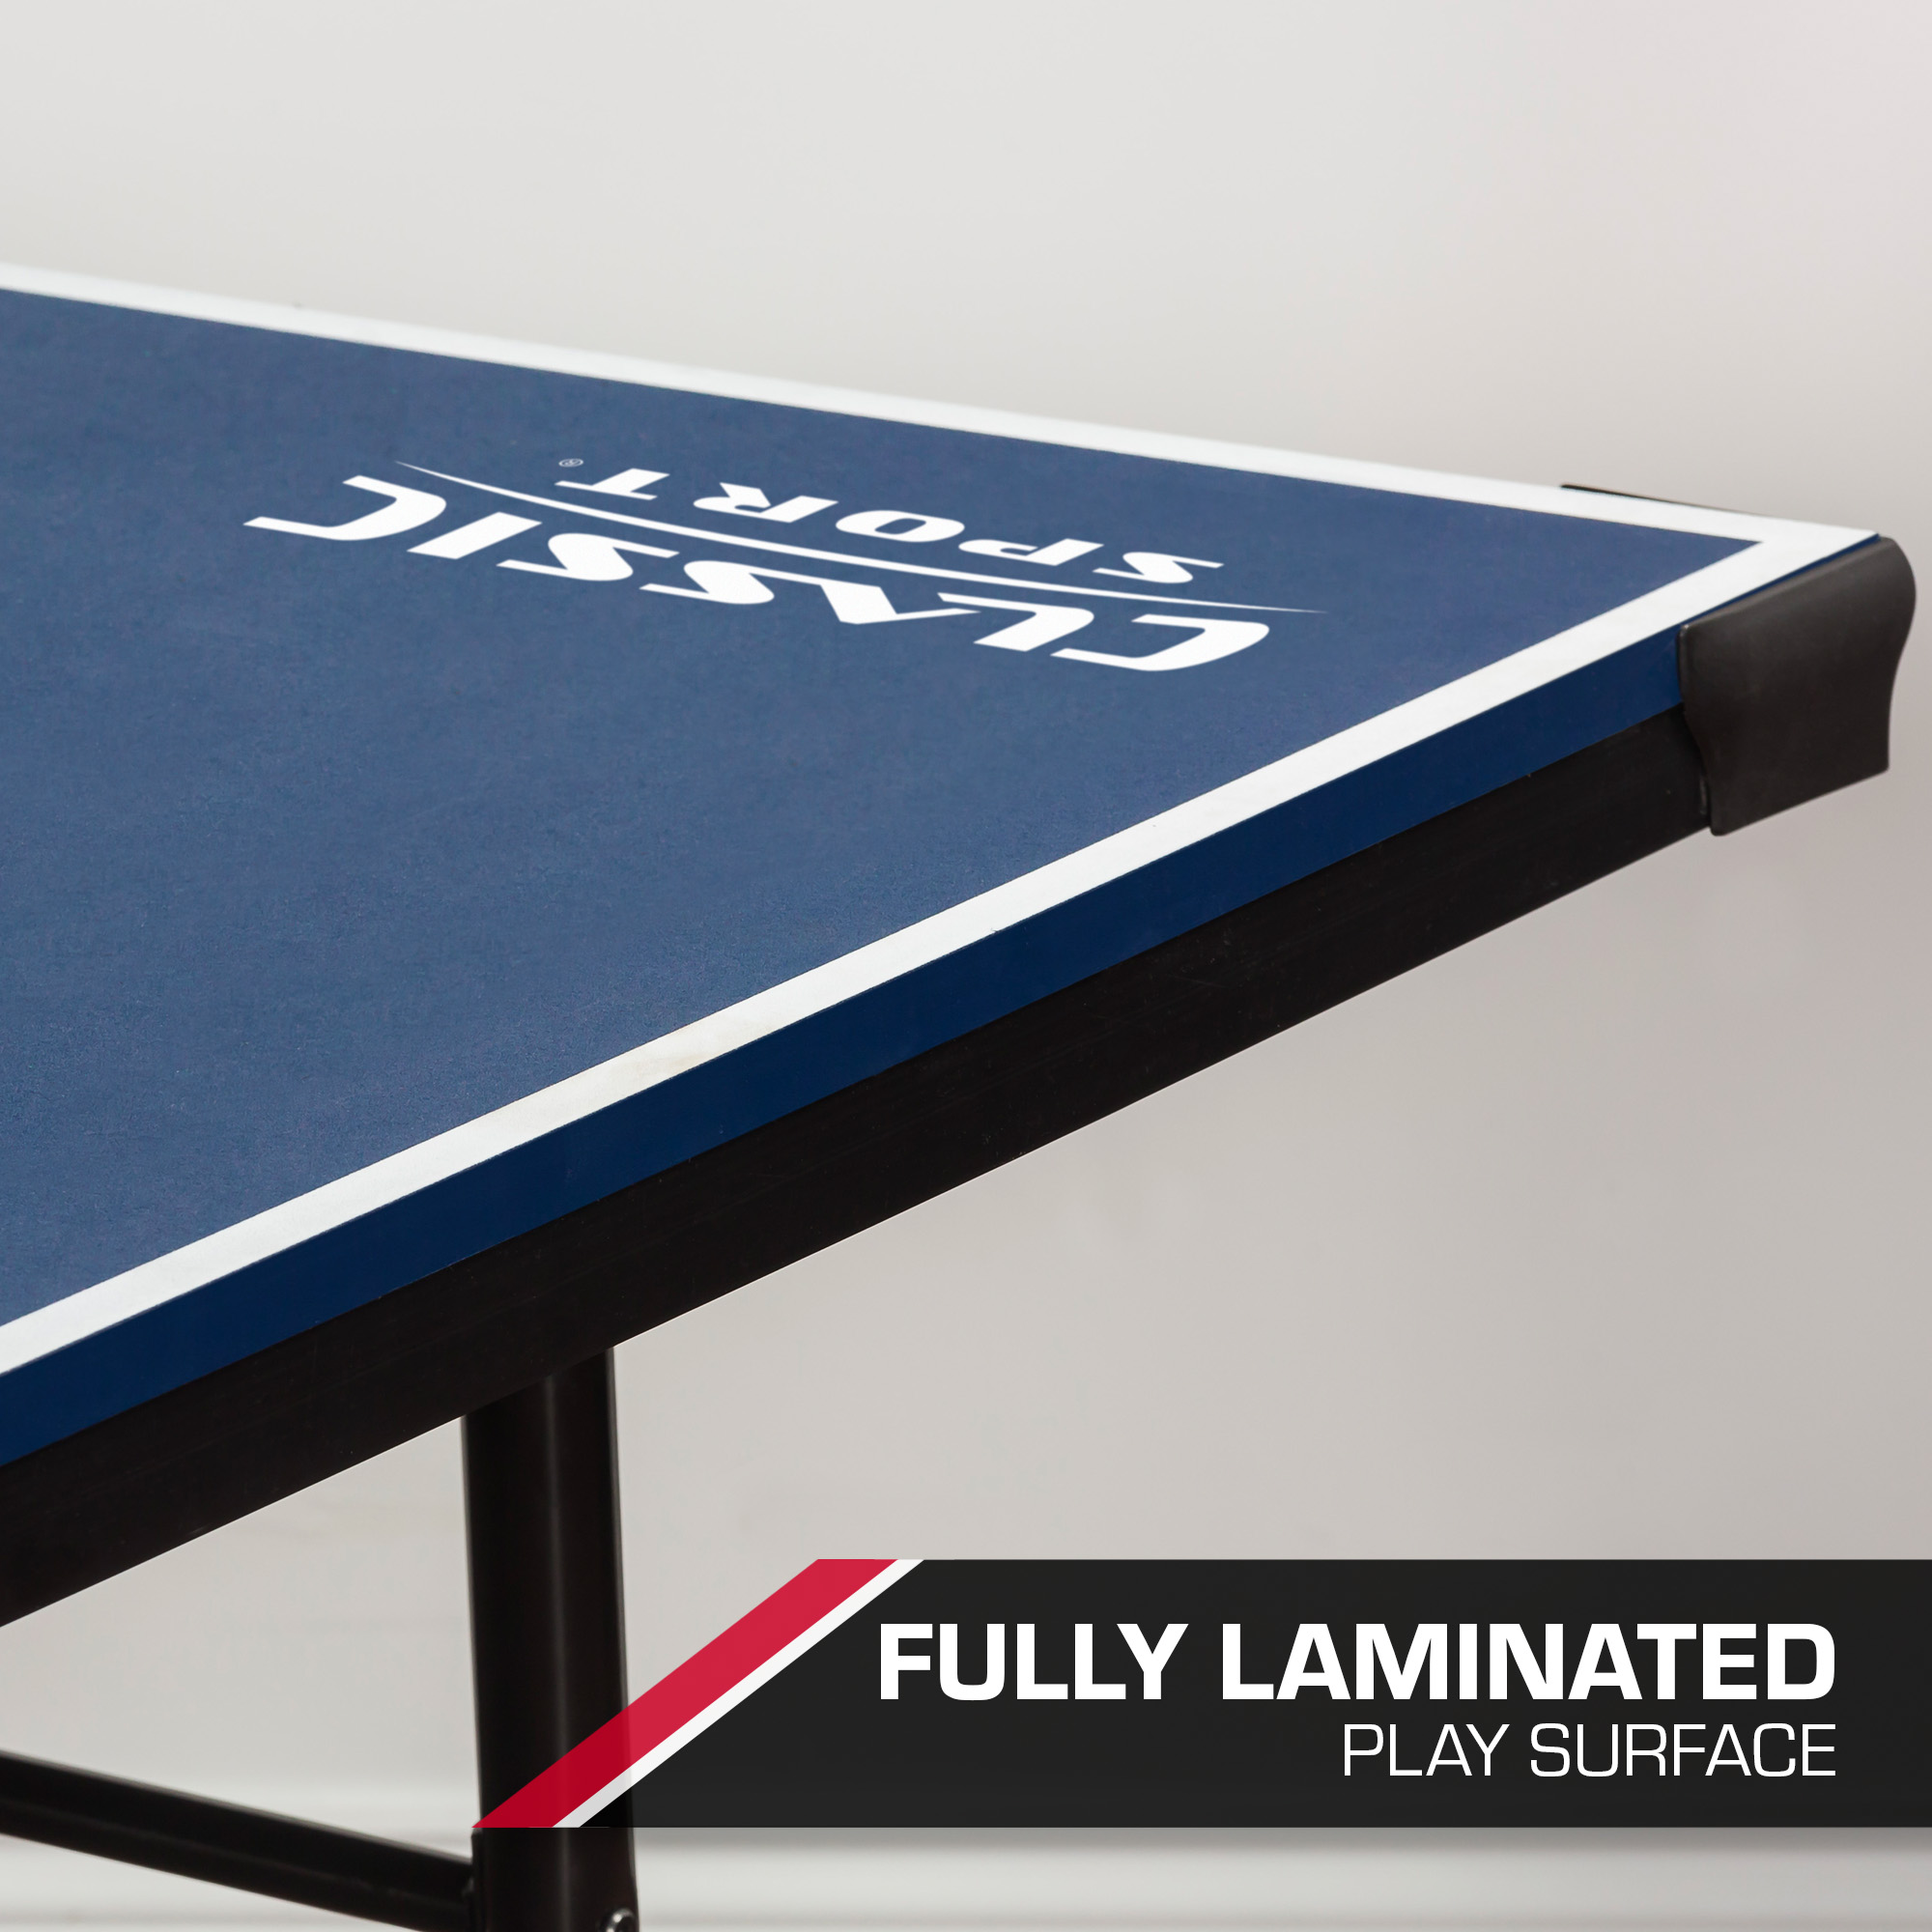 EastPoint Sports Classic Sport 15mm Table Tennis Table, Tournament Size 9 ft. x 5 ft. for Indoor Game Room - image 6 of 10